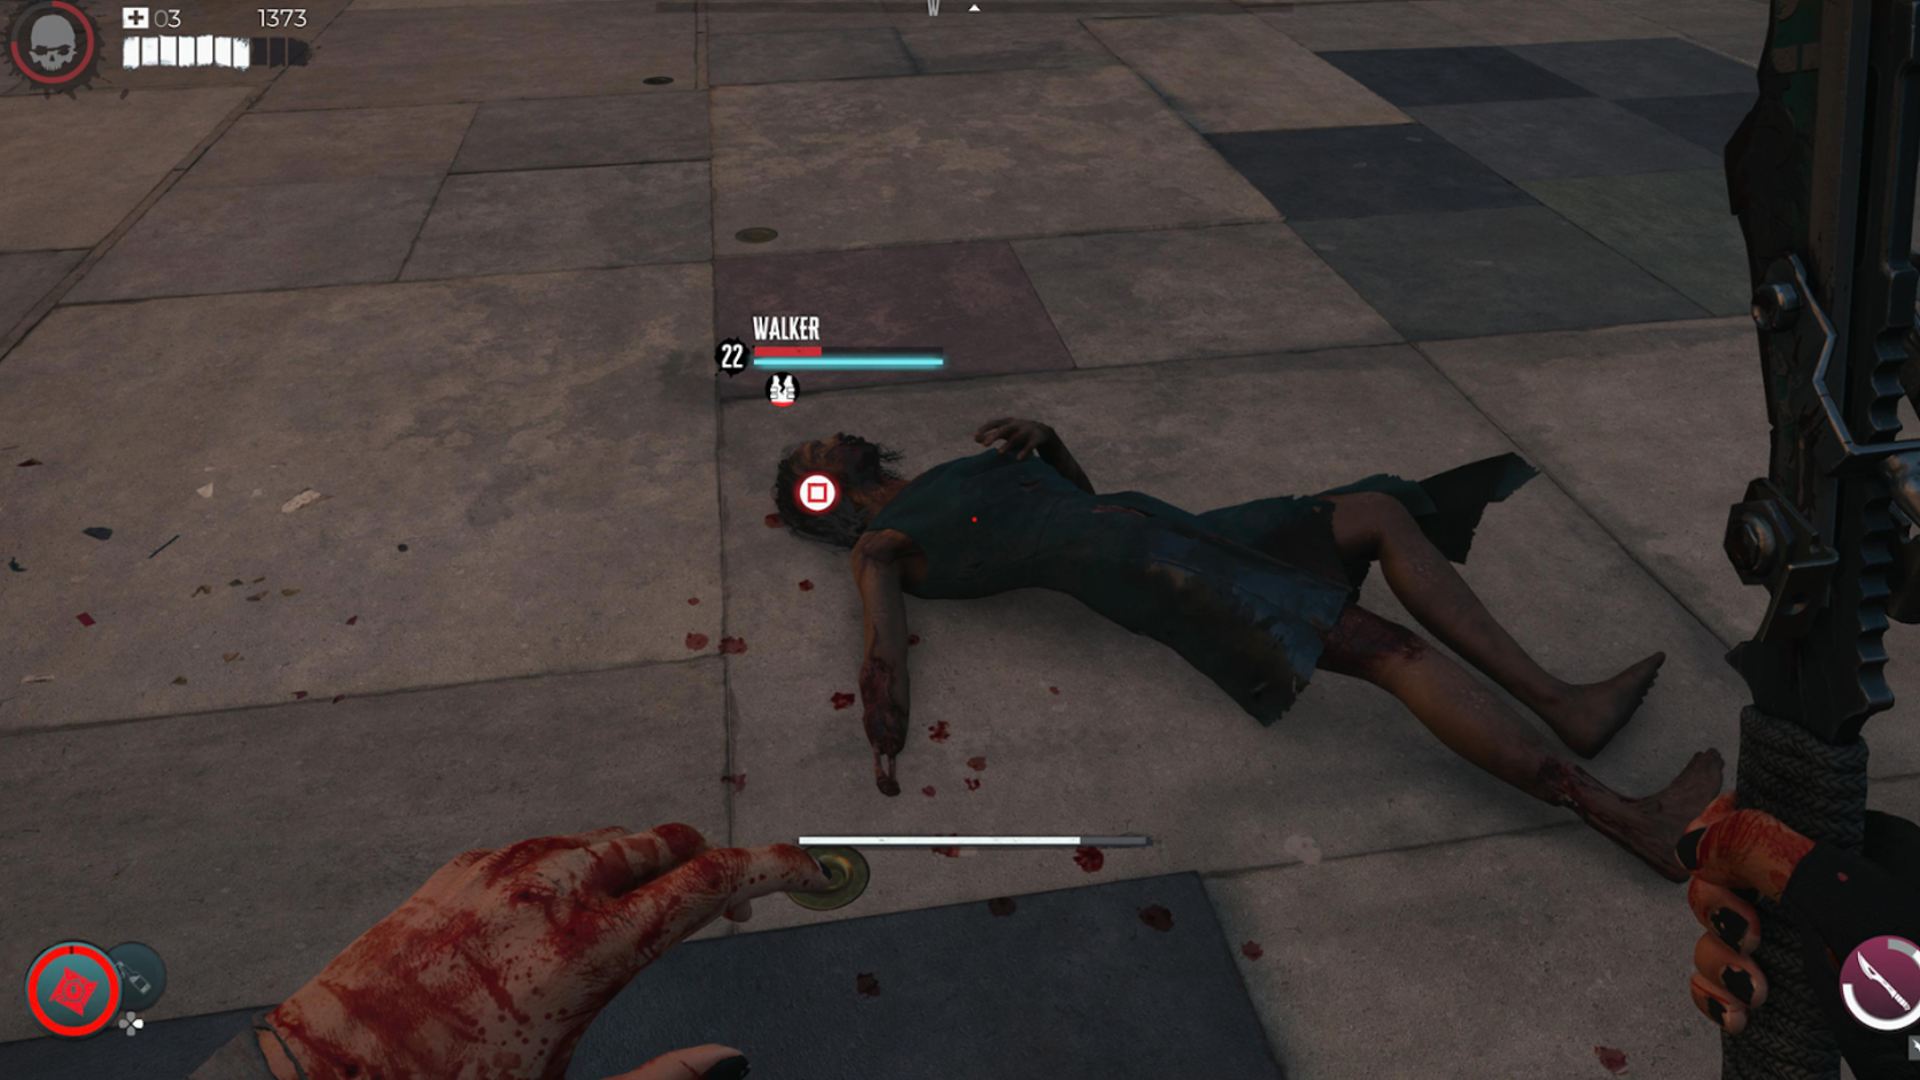 Dead Island 2 best skills Amy: Zmy can be seen punching a zombie